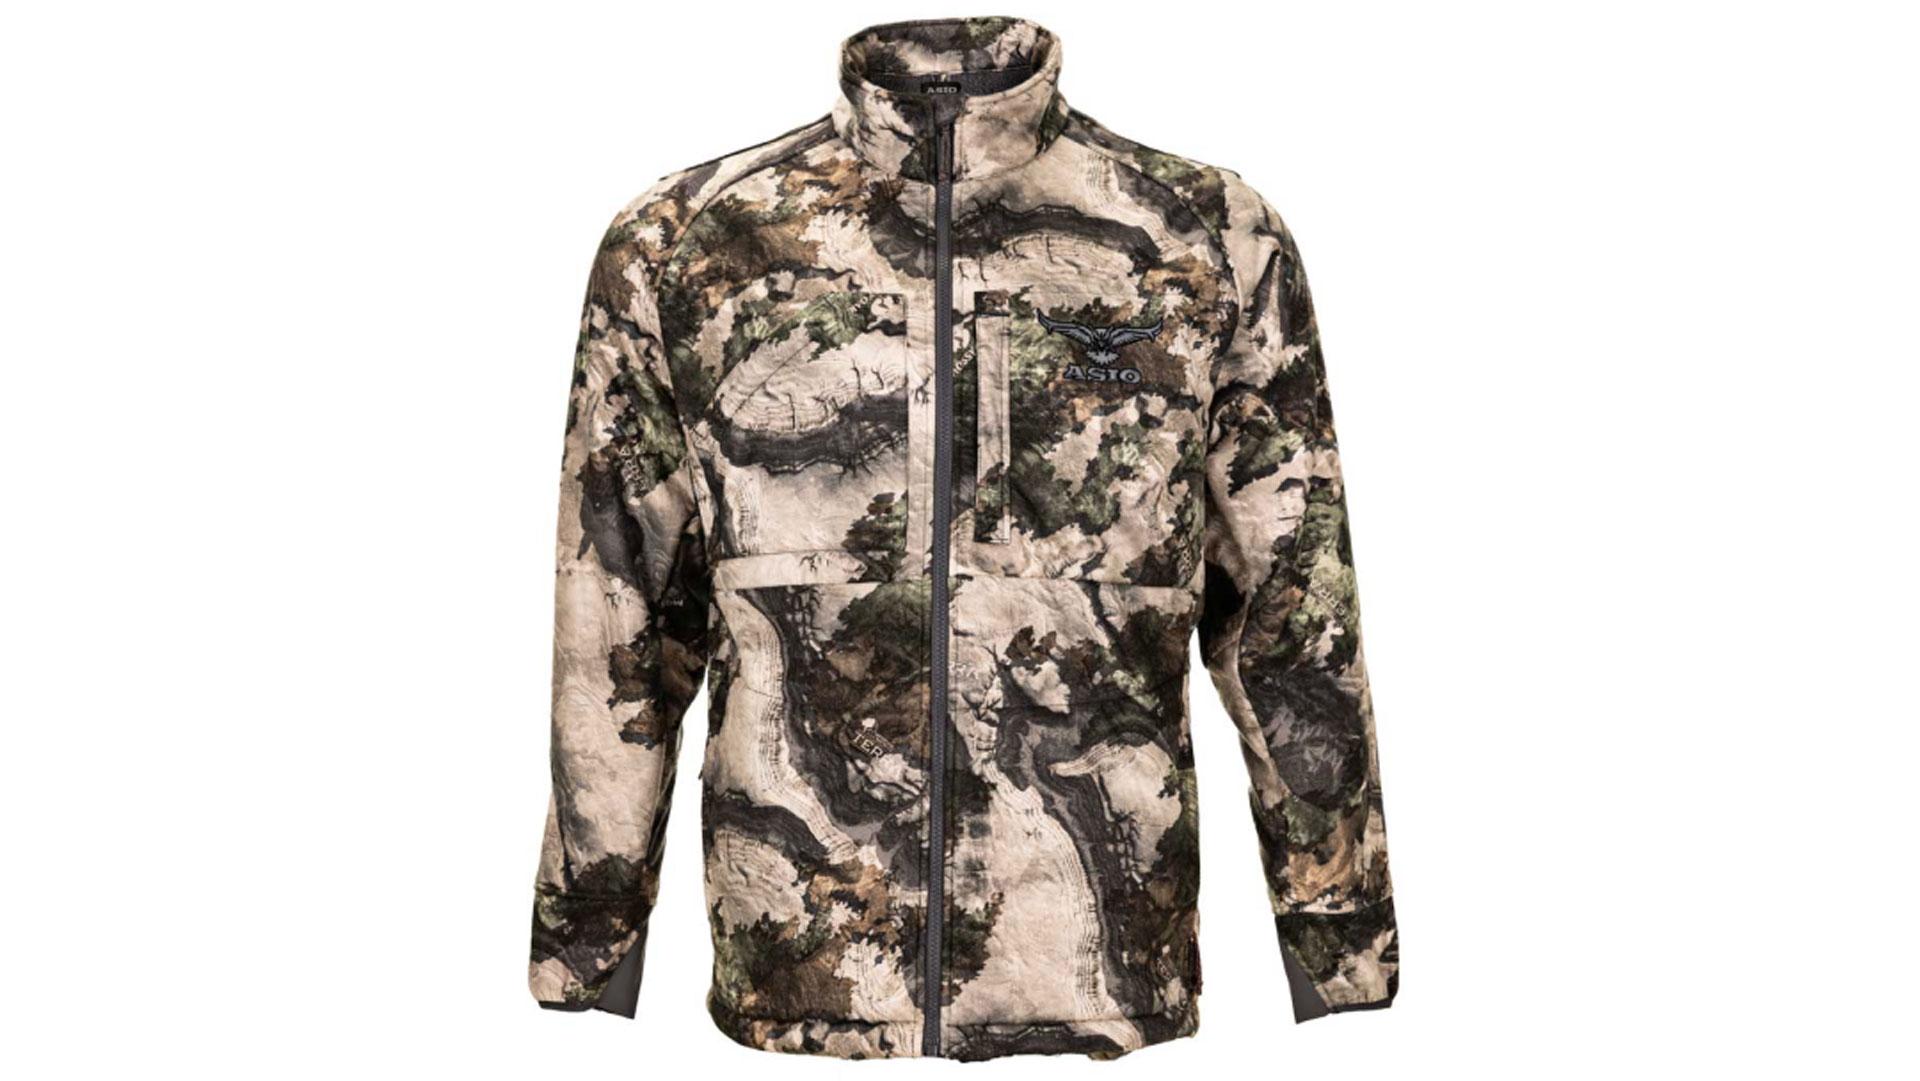 Mossy Oak Partners with Asio Gear | An Official Journal Of The NRA